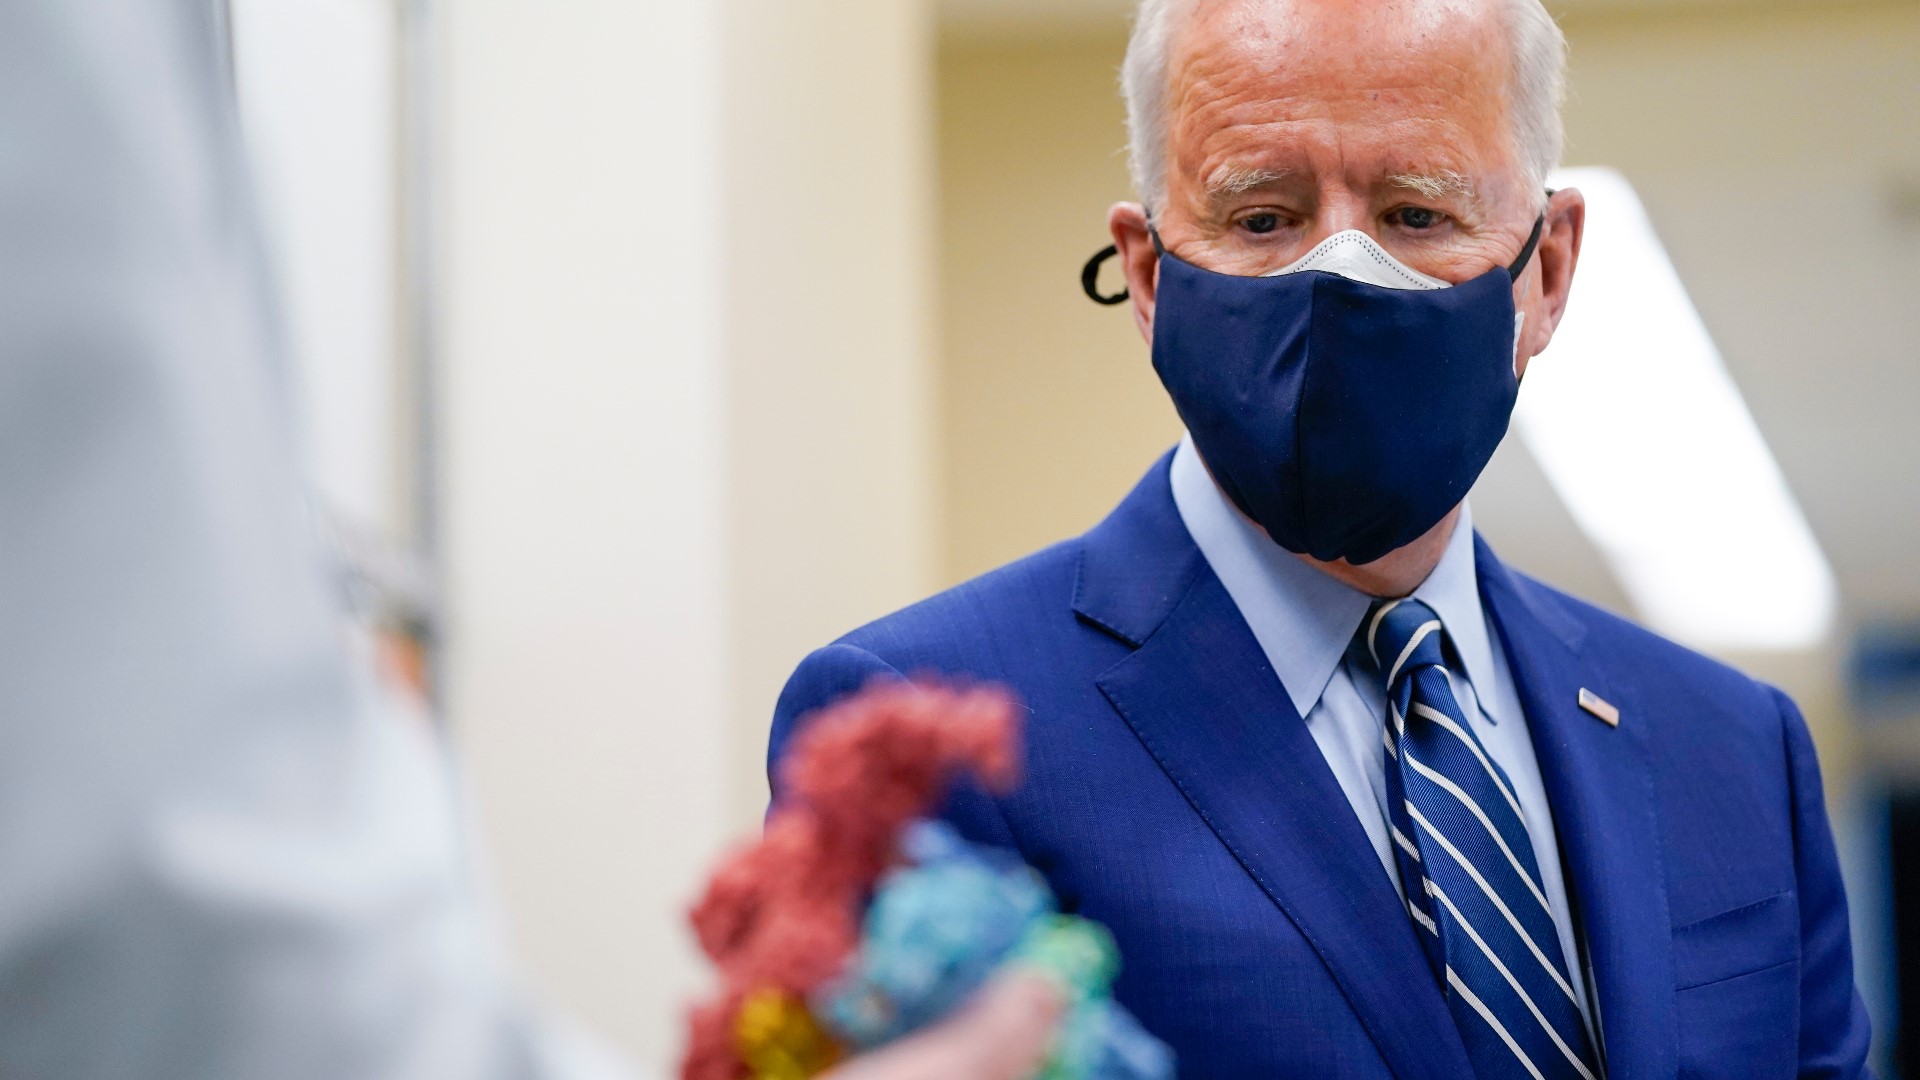 Biden can check off on nearly all campaign promises centered on the pandemic. Some issues have been tougher for him though, like immigration.